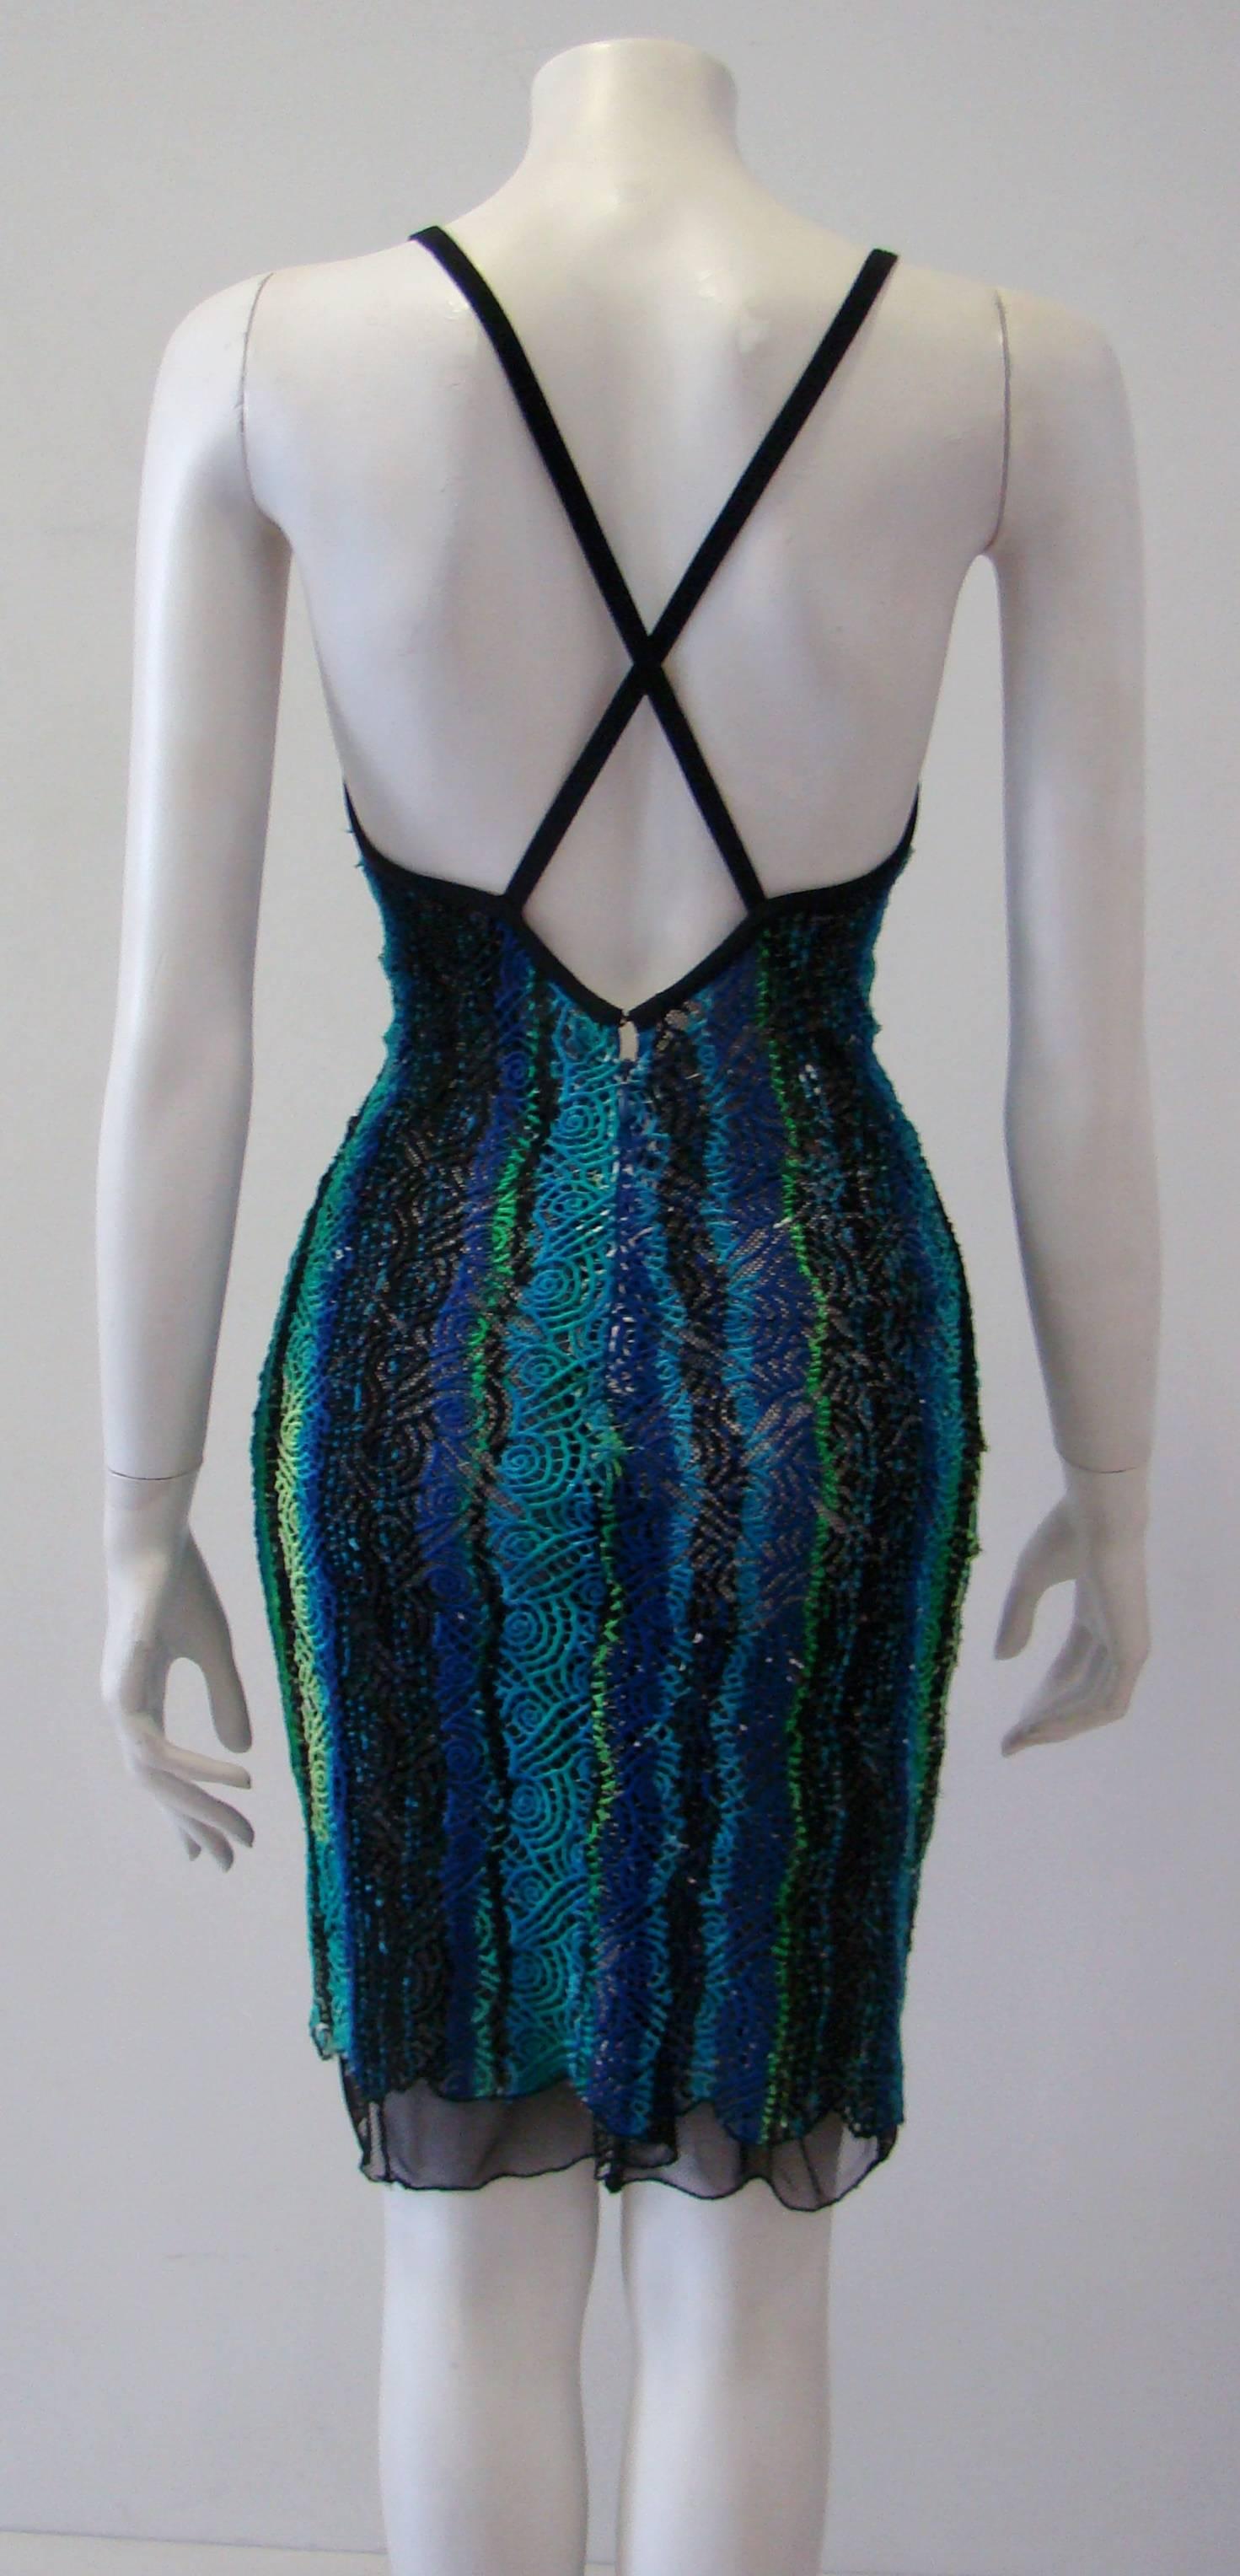 Gianni Versace Couture Multi-Coloured Threaded Dress With Net Spring, 1994 For Sale 3